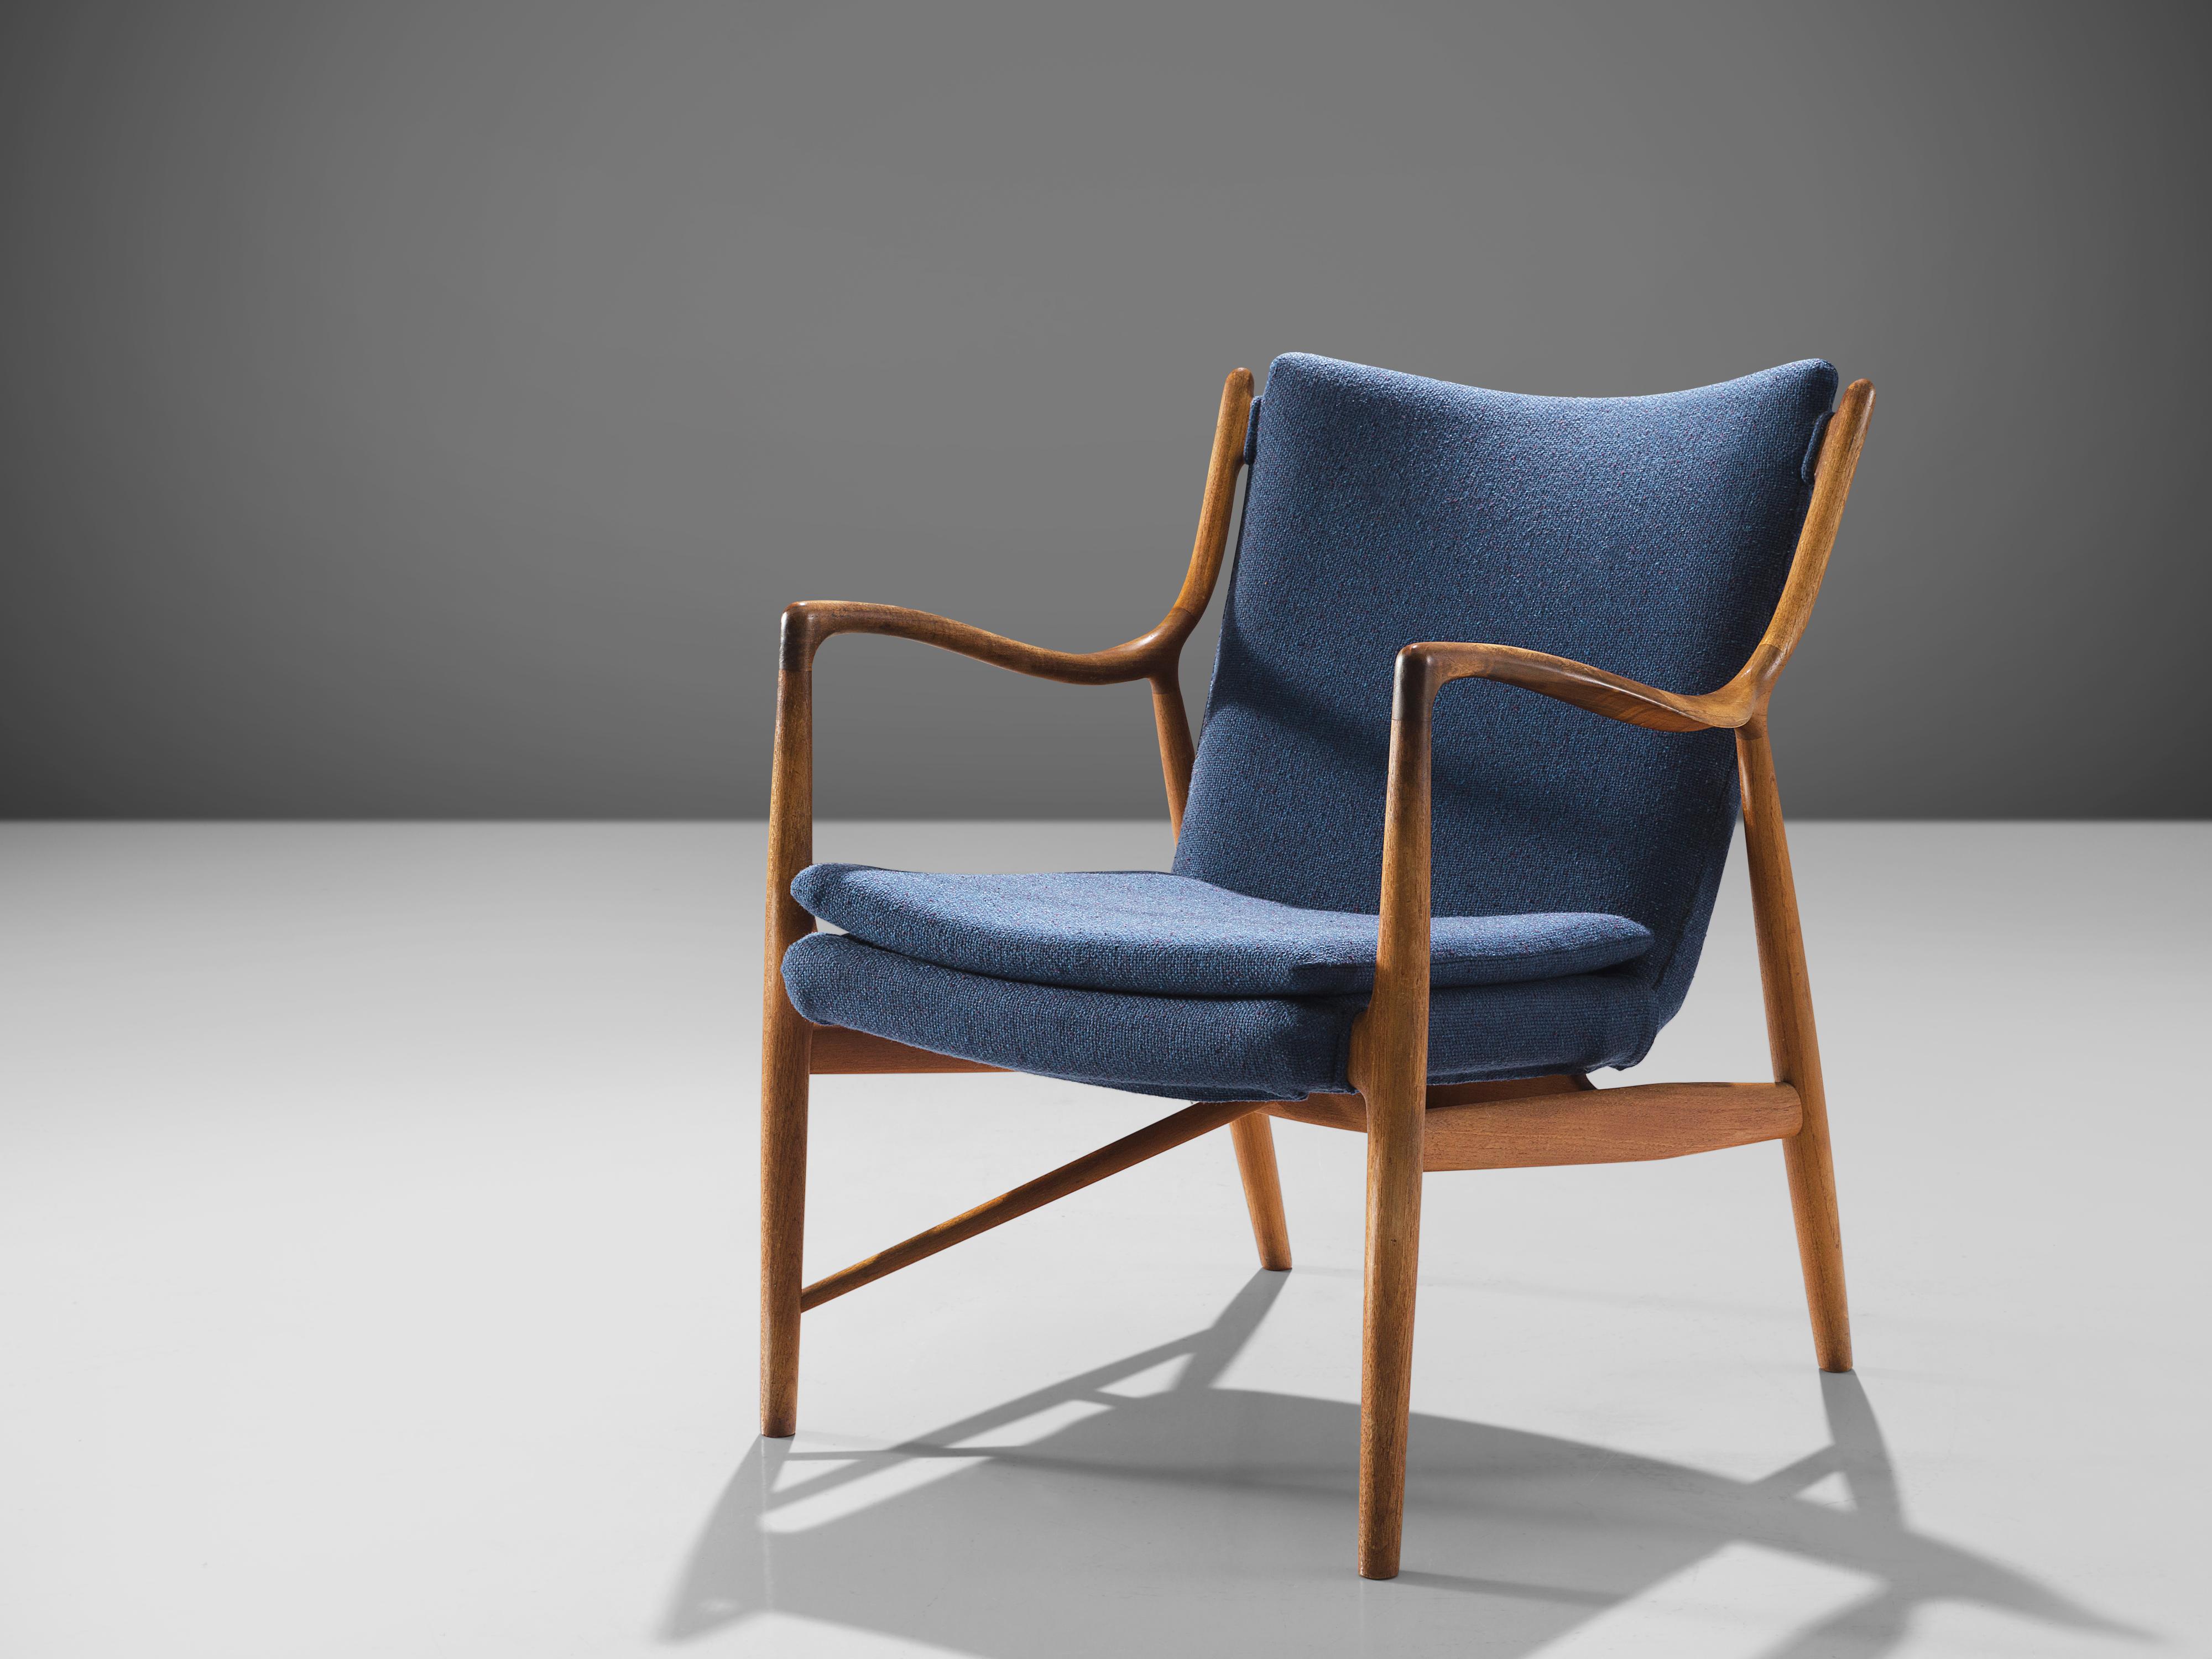 Finn Juhl for Niels Vodder, NV45, teak, blue fabric, Denmark, design 1945, production, 1950s

This ‘NV45’ chair by Finn Juhl is executed in teak and blue fabric. The chair is made by master woodworker Niels Vodder and marked on the inside of the